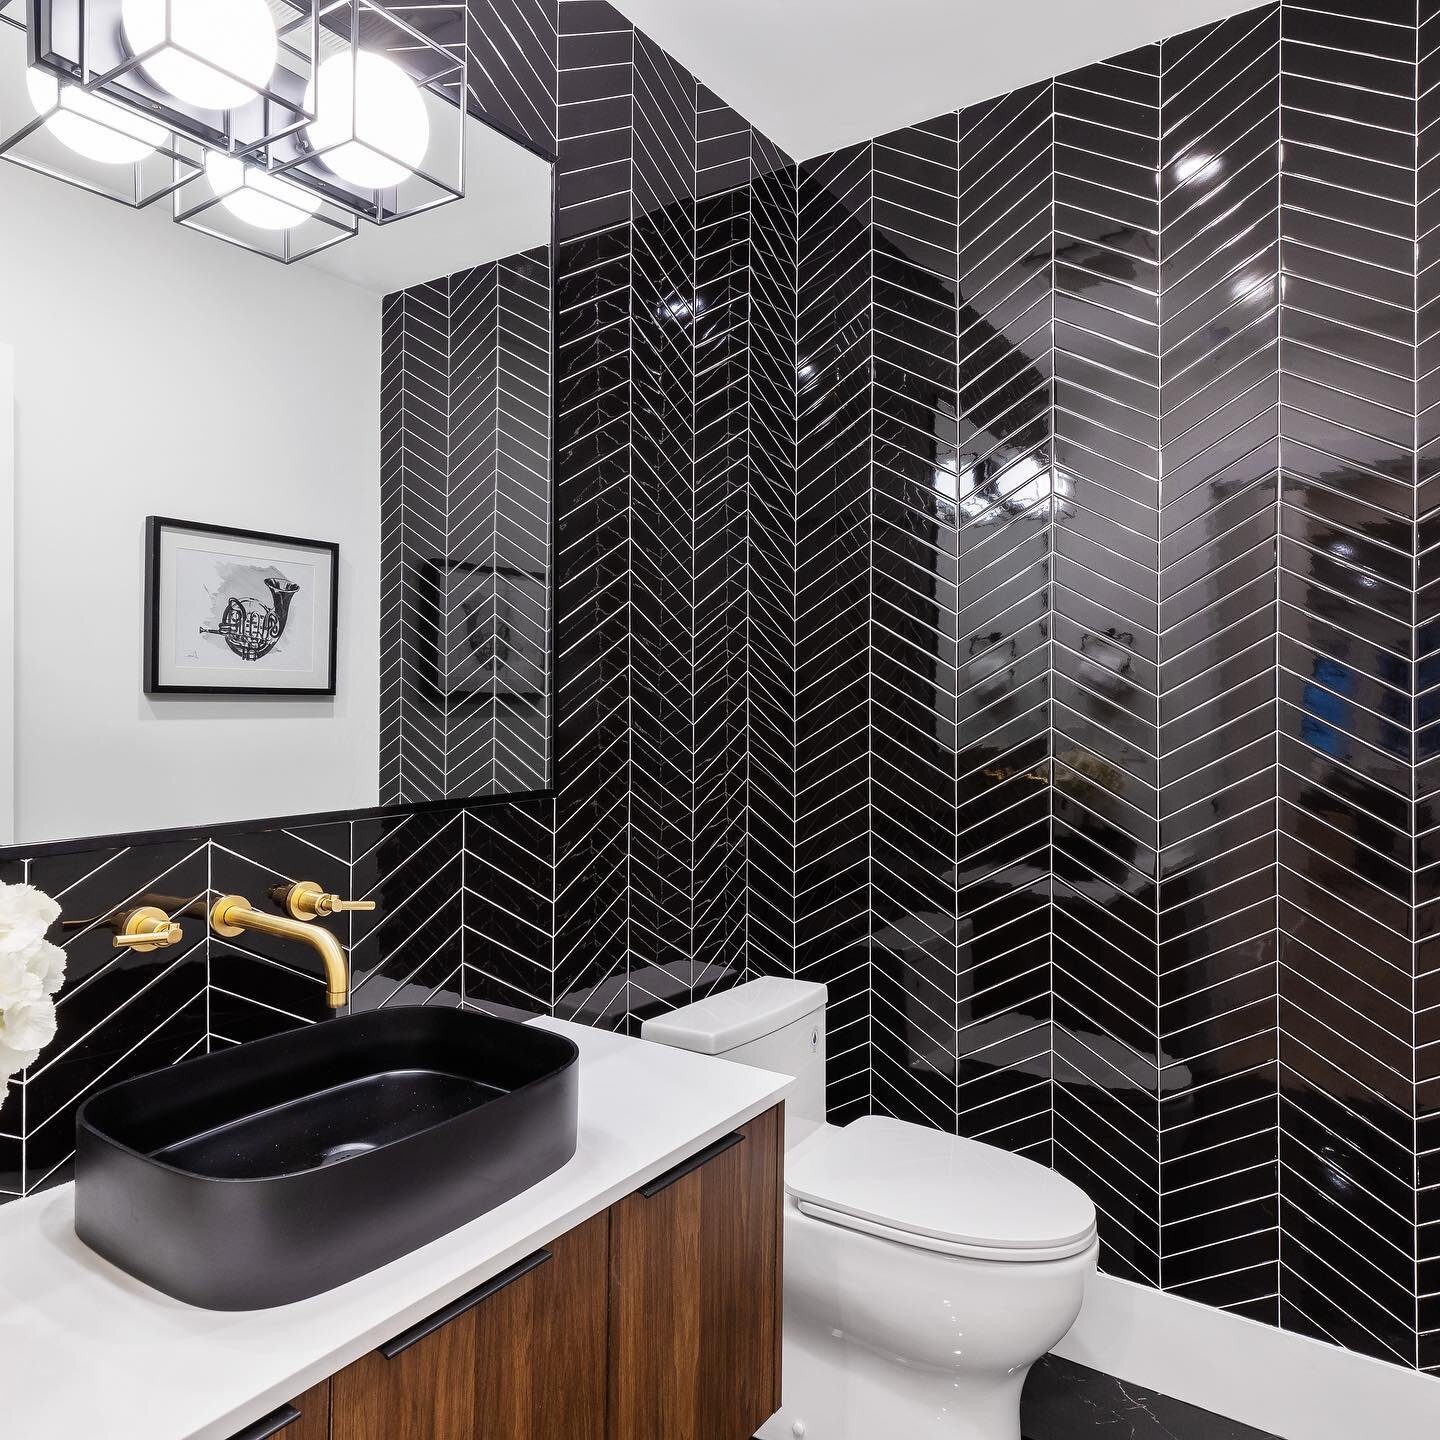 Powder room POW! Our client wanted something that stood out...this is what we delivered!

#interiordesigner #interiordesigner #vancouver #vancouverinteriordesign #vancouverinteriordesigner #backsplashtile #accenttile #bathroomdesign #powderroomdesign